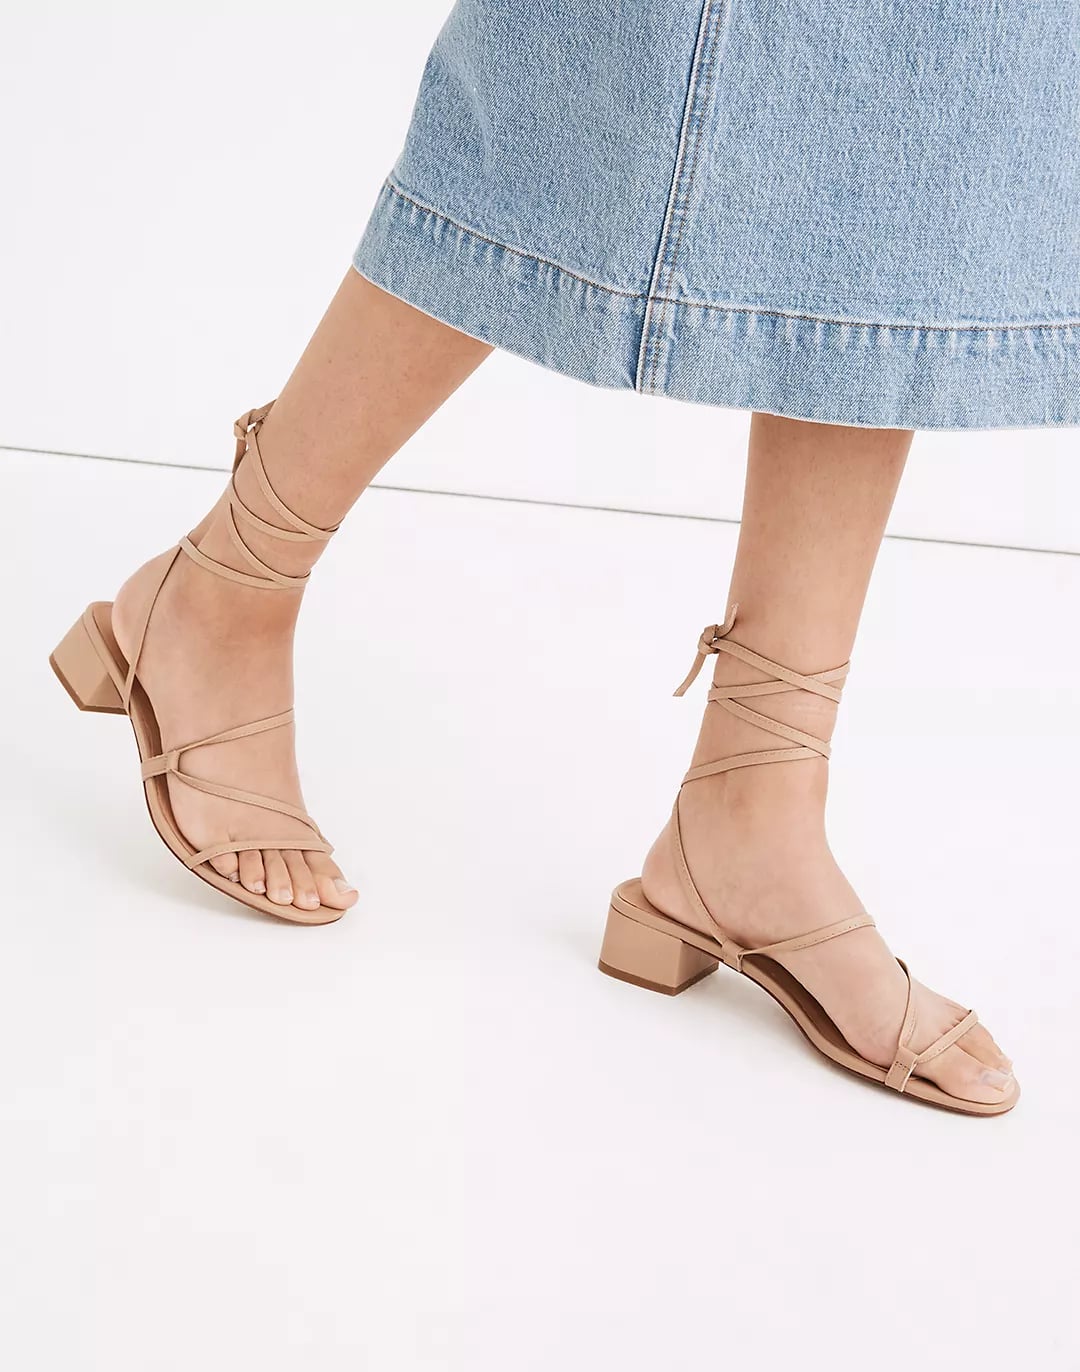 Best Shoes From Madewell | 2021 | POPSUGAR Fashion